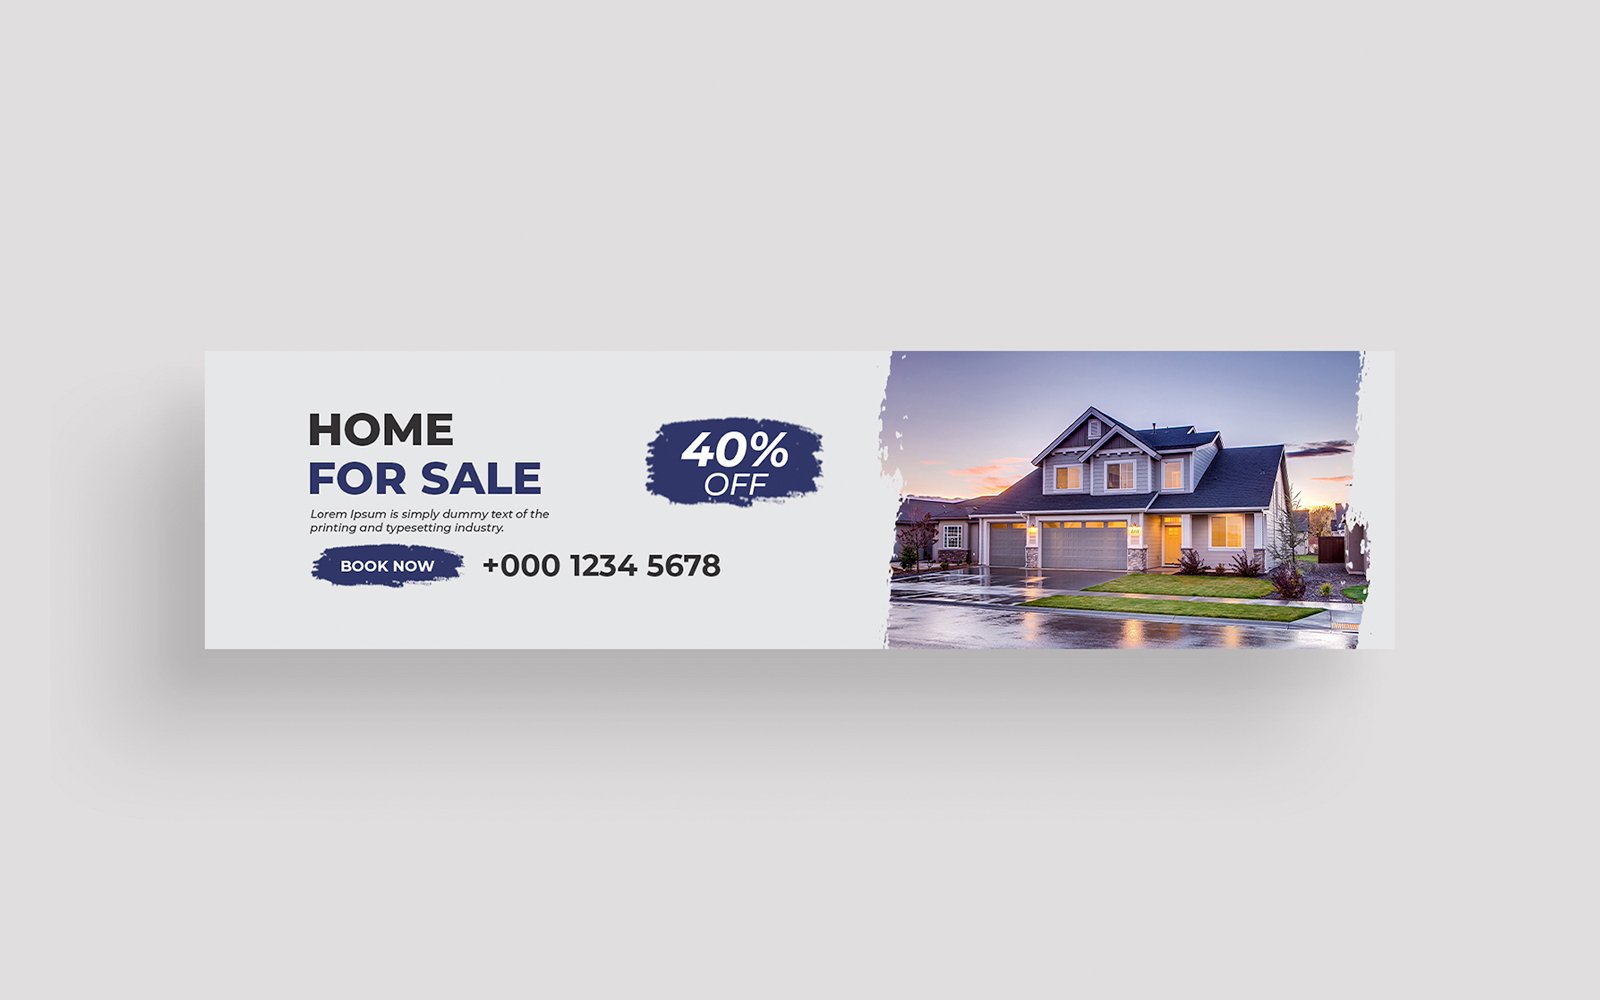 Real Estate Agency LinkedIn Cover Photo Template